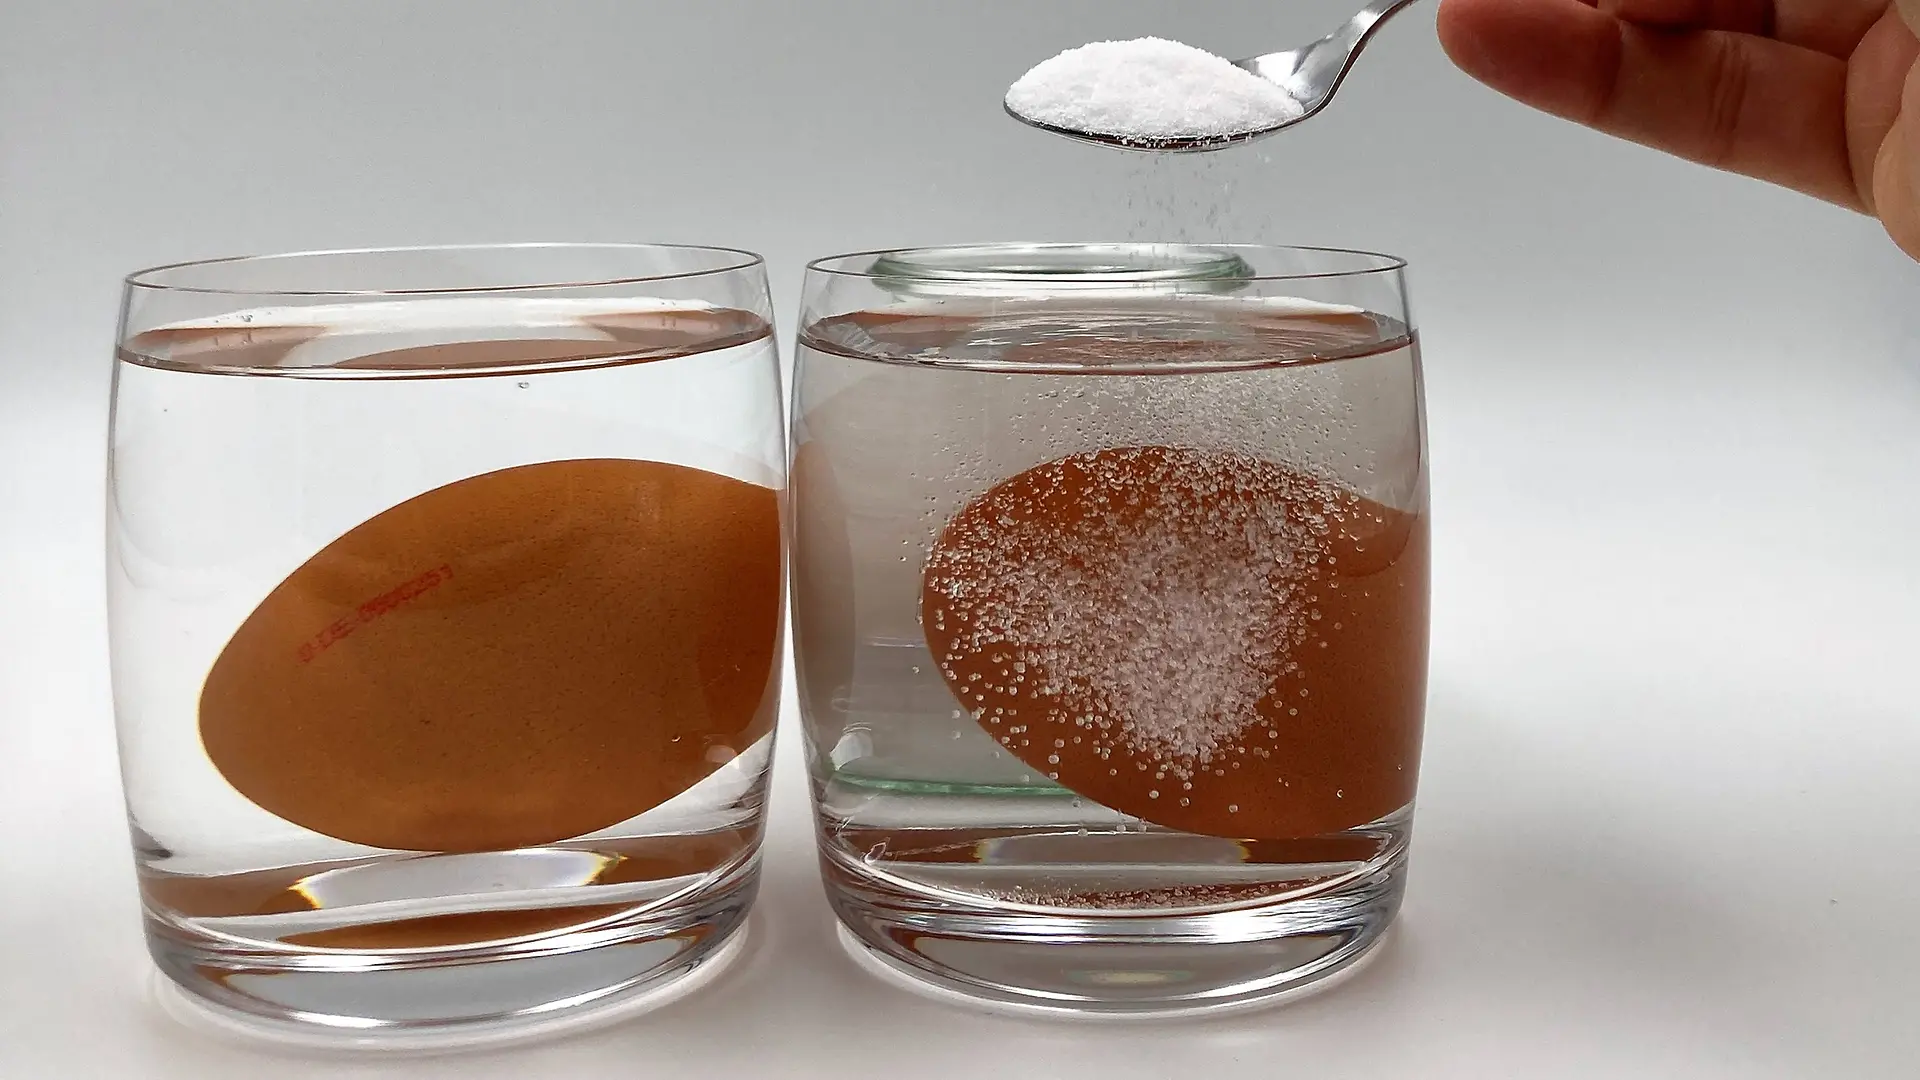 Two glasses, each filled with water and an egg. On the right side is a part of a hand holding a teaspoon with salt, which is placed in the right glass.